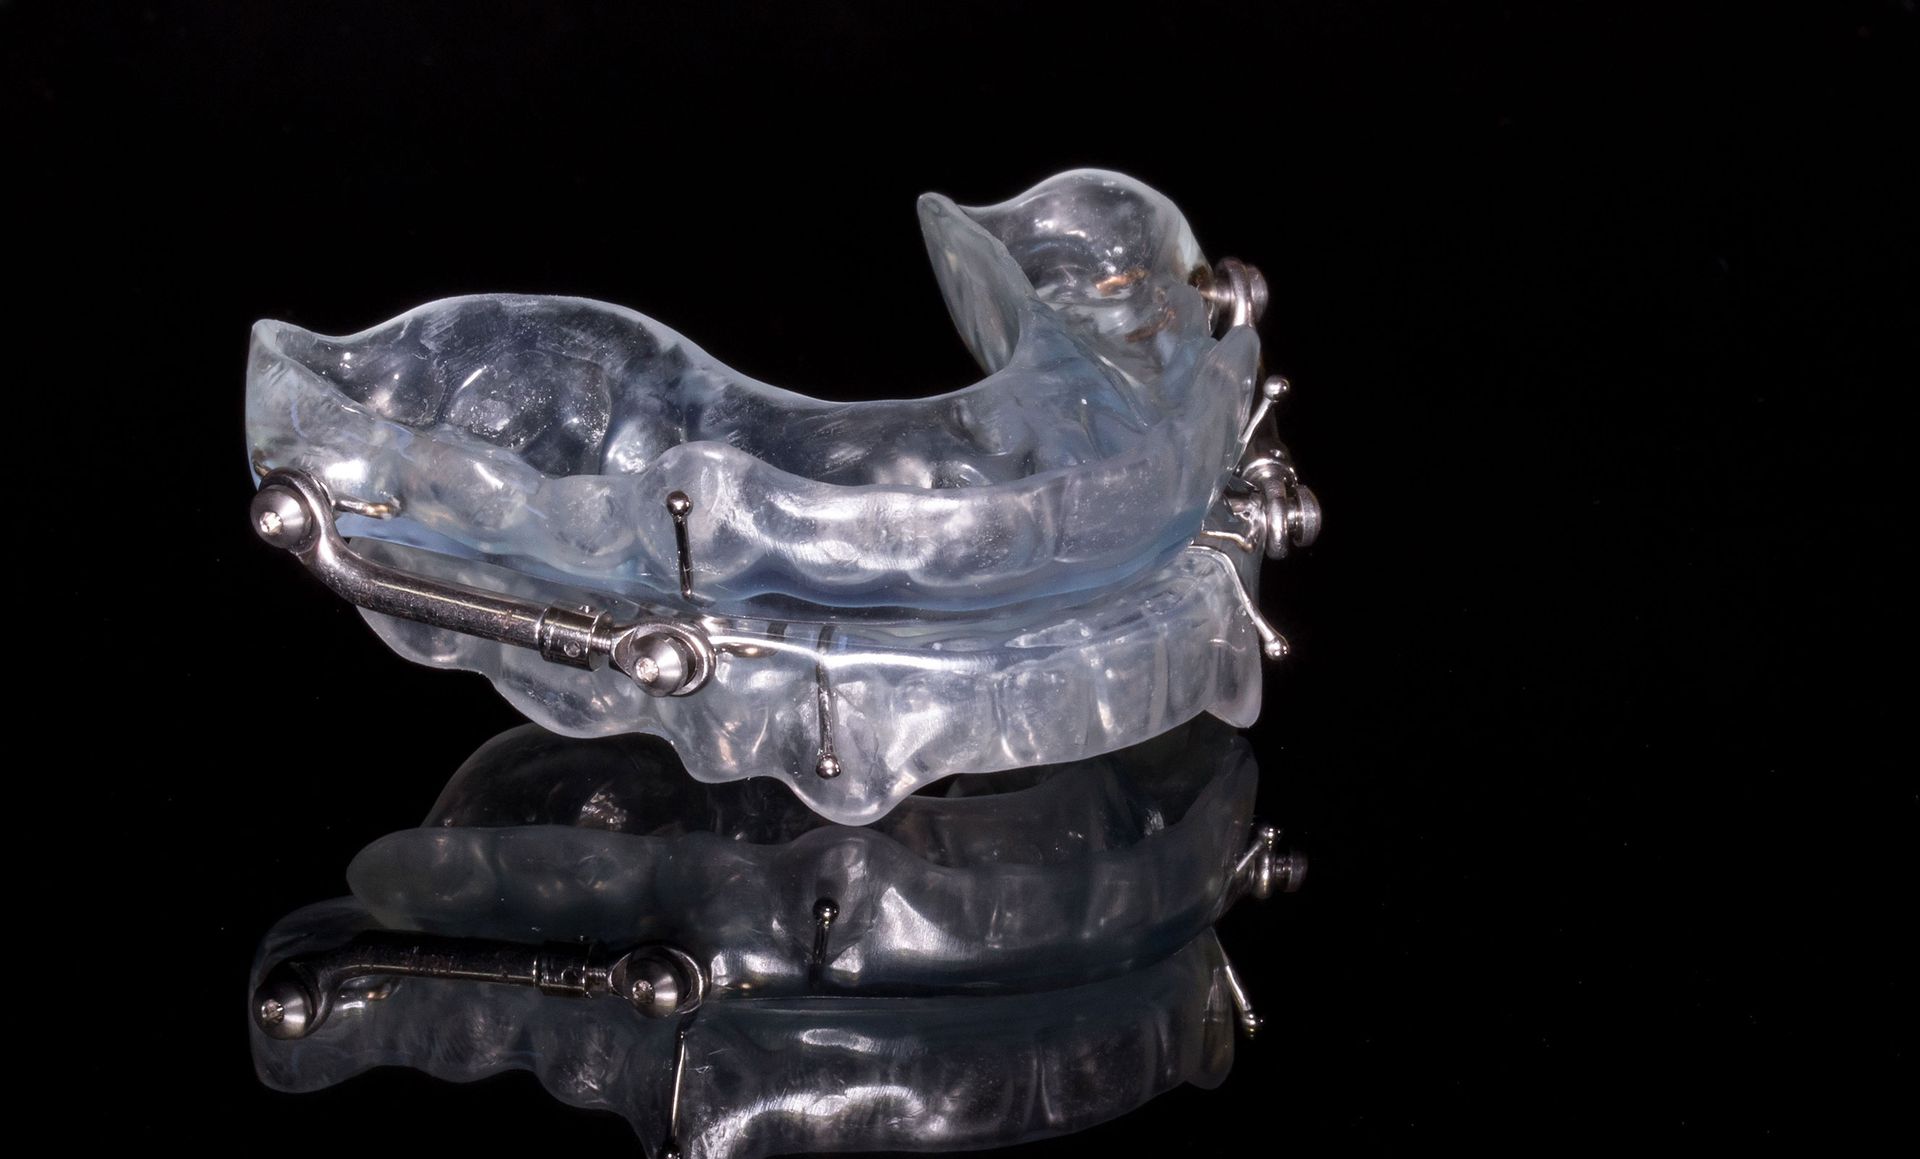 A clear mouth guard is sitting on a black surface.